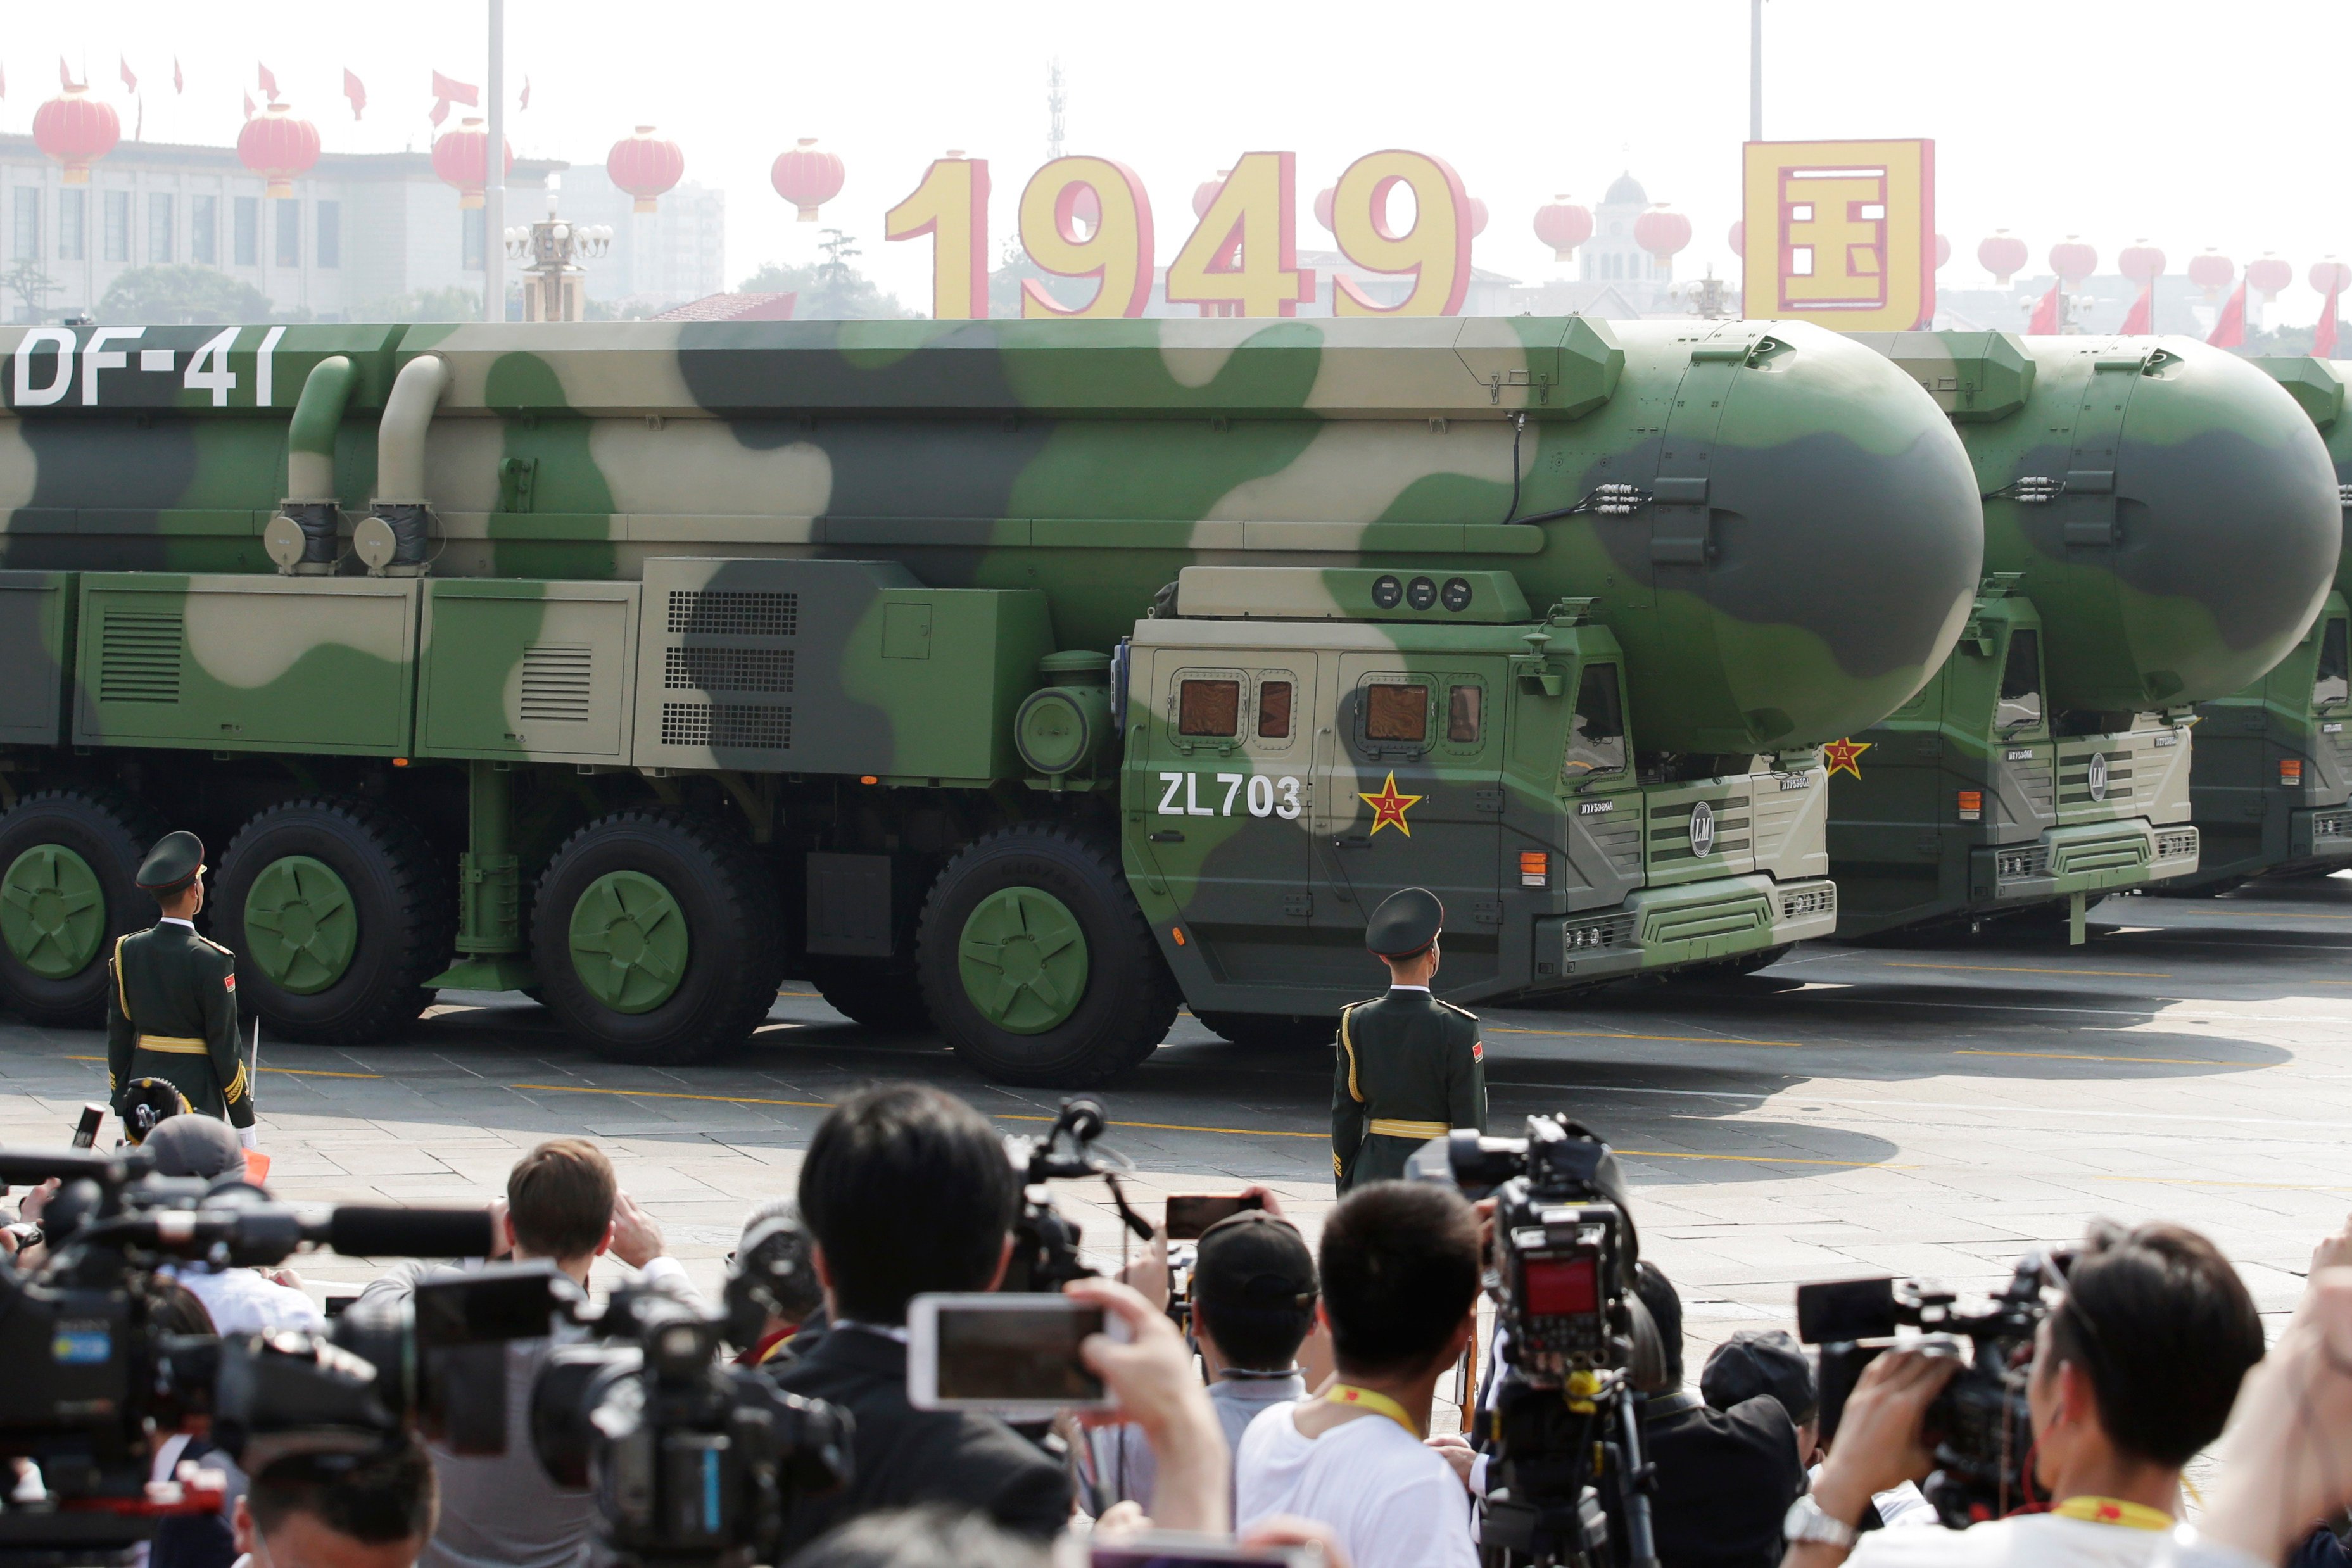 Defence experts say China will continue to improve its ICBM technology, such as its DF-41 missiles, to upgrade its air, ground and sea-based nuclear delivery systems. Photo: Reuters